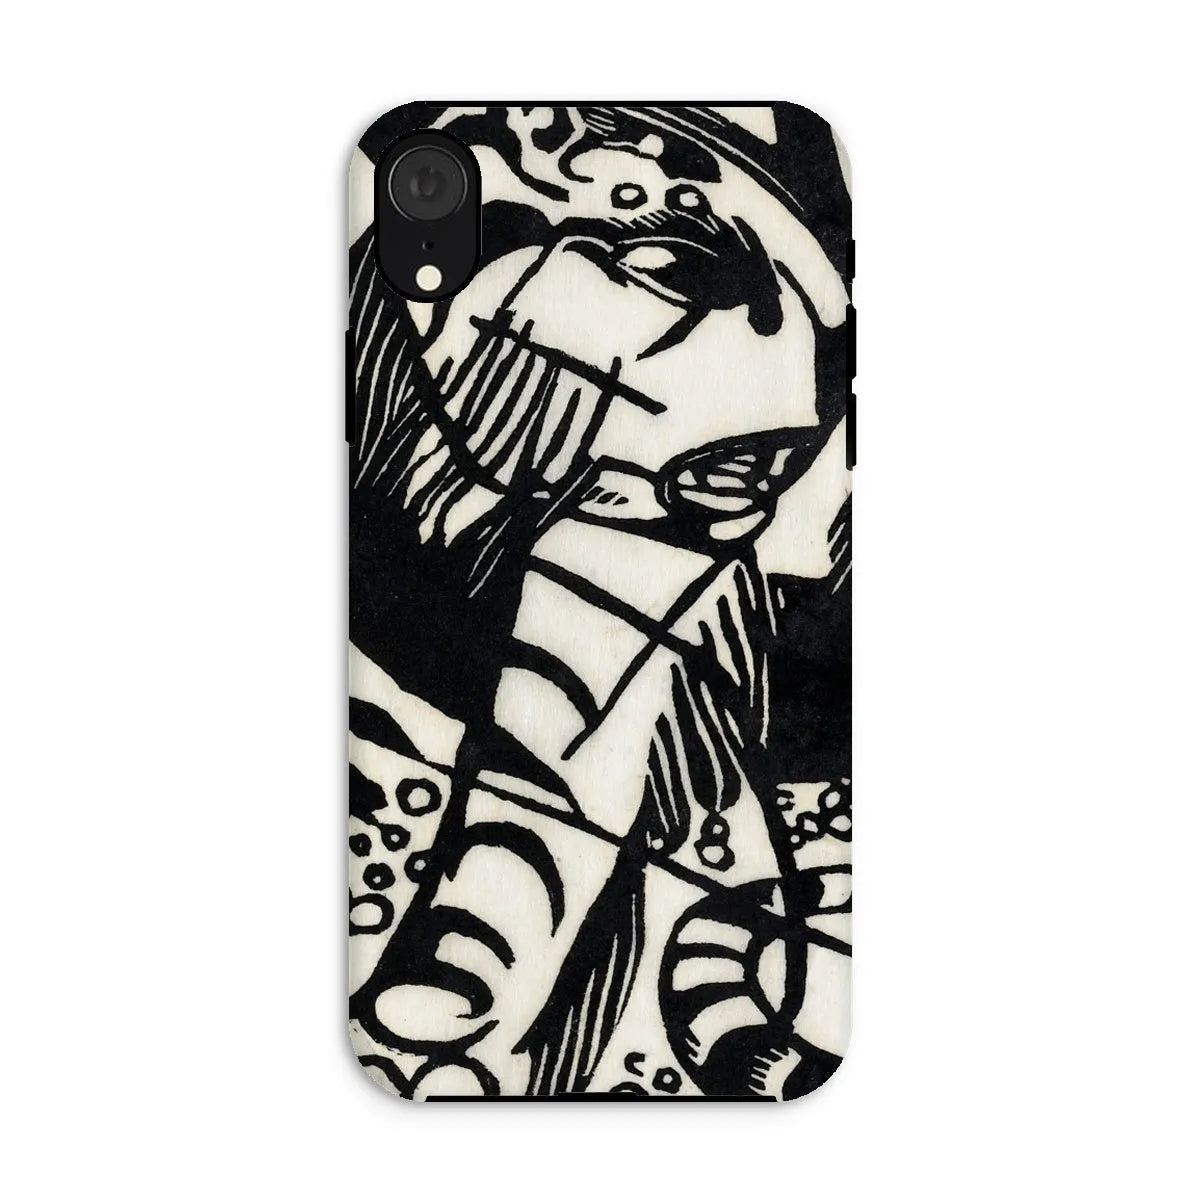 Tiger - Animal Aesthetic Phone Case - Franz Marc - Iphone Xr / Matte - Mobile Phone Cases - Aesthetic Art